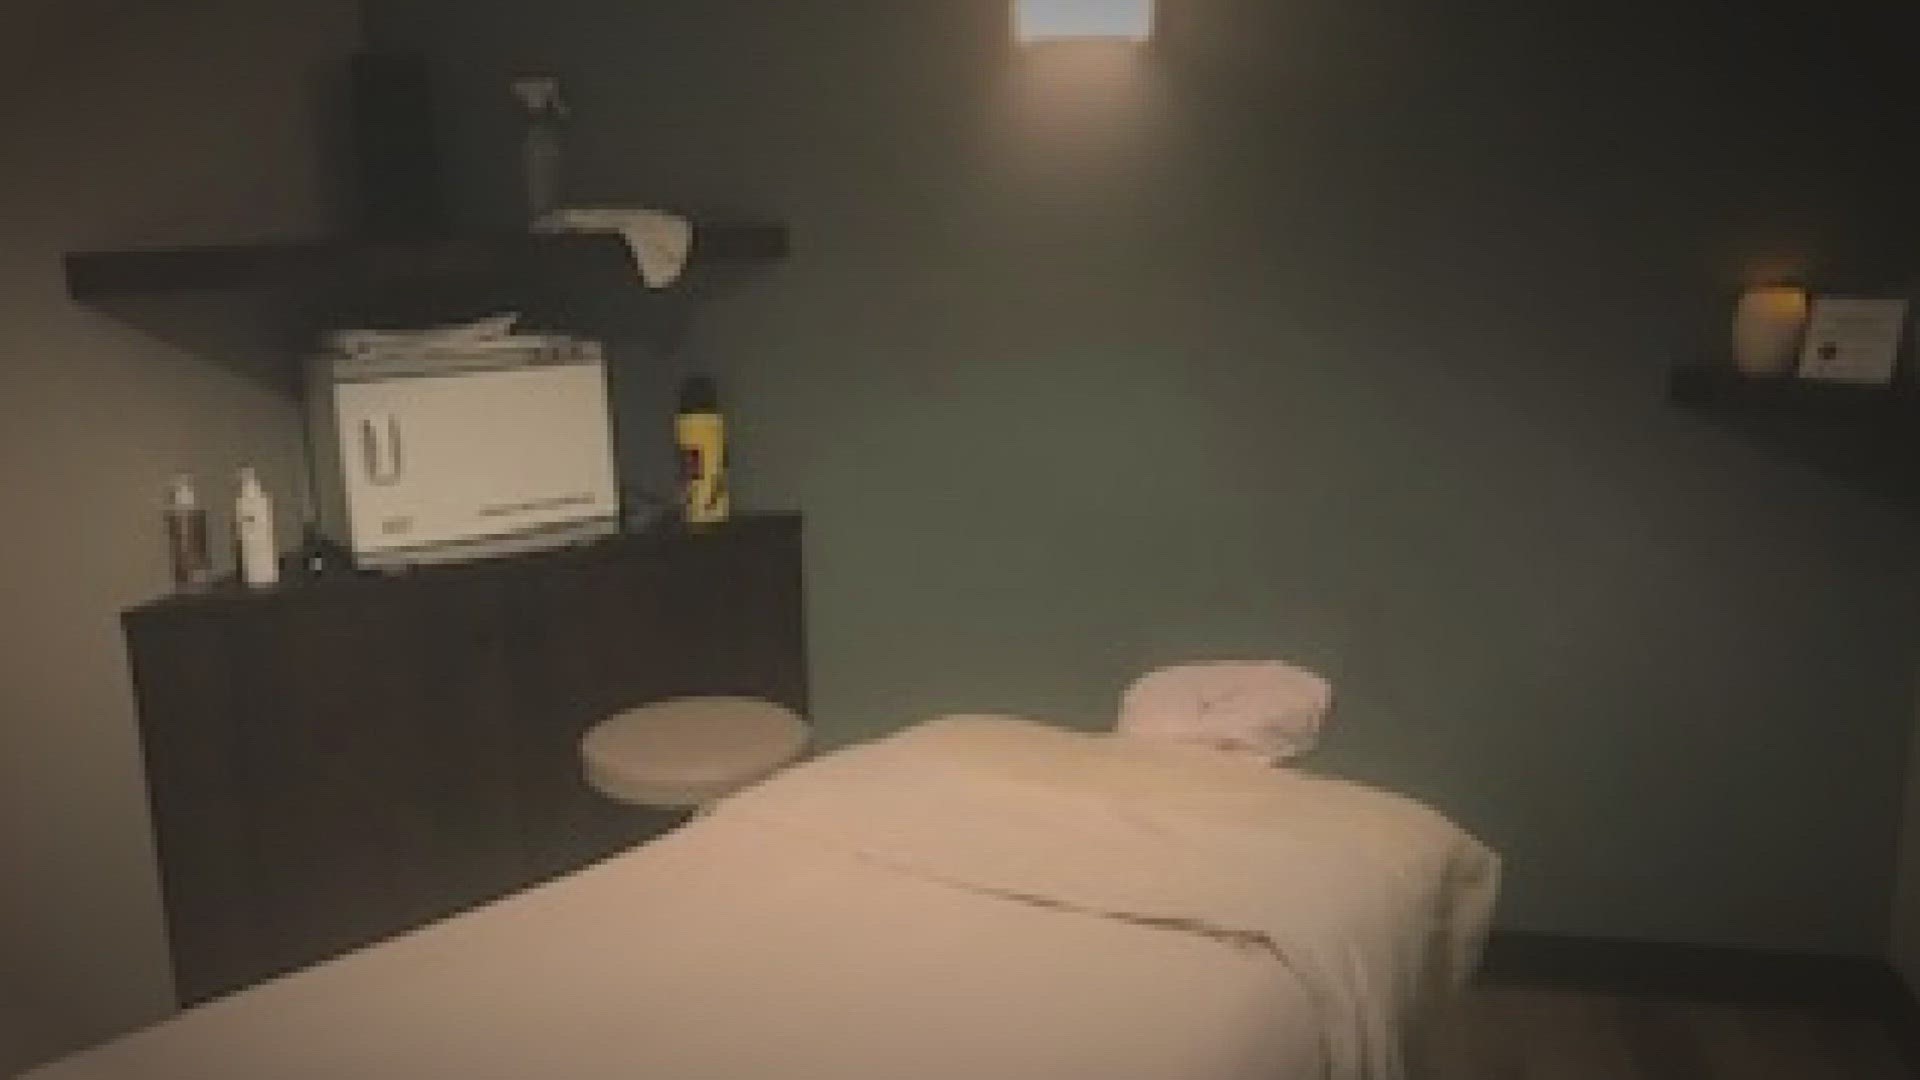 Months after one woman claimed a massage therapist sexually assaulted her, another woman came forward with a similar claim.